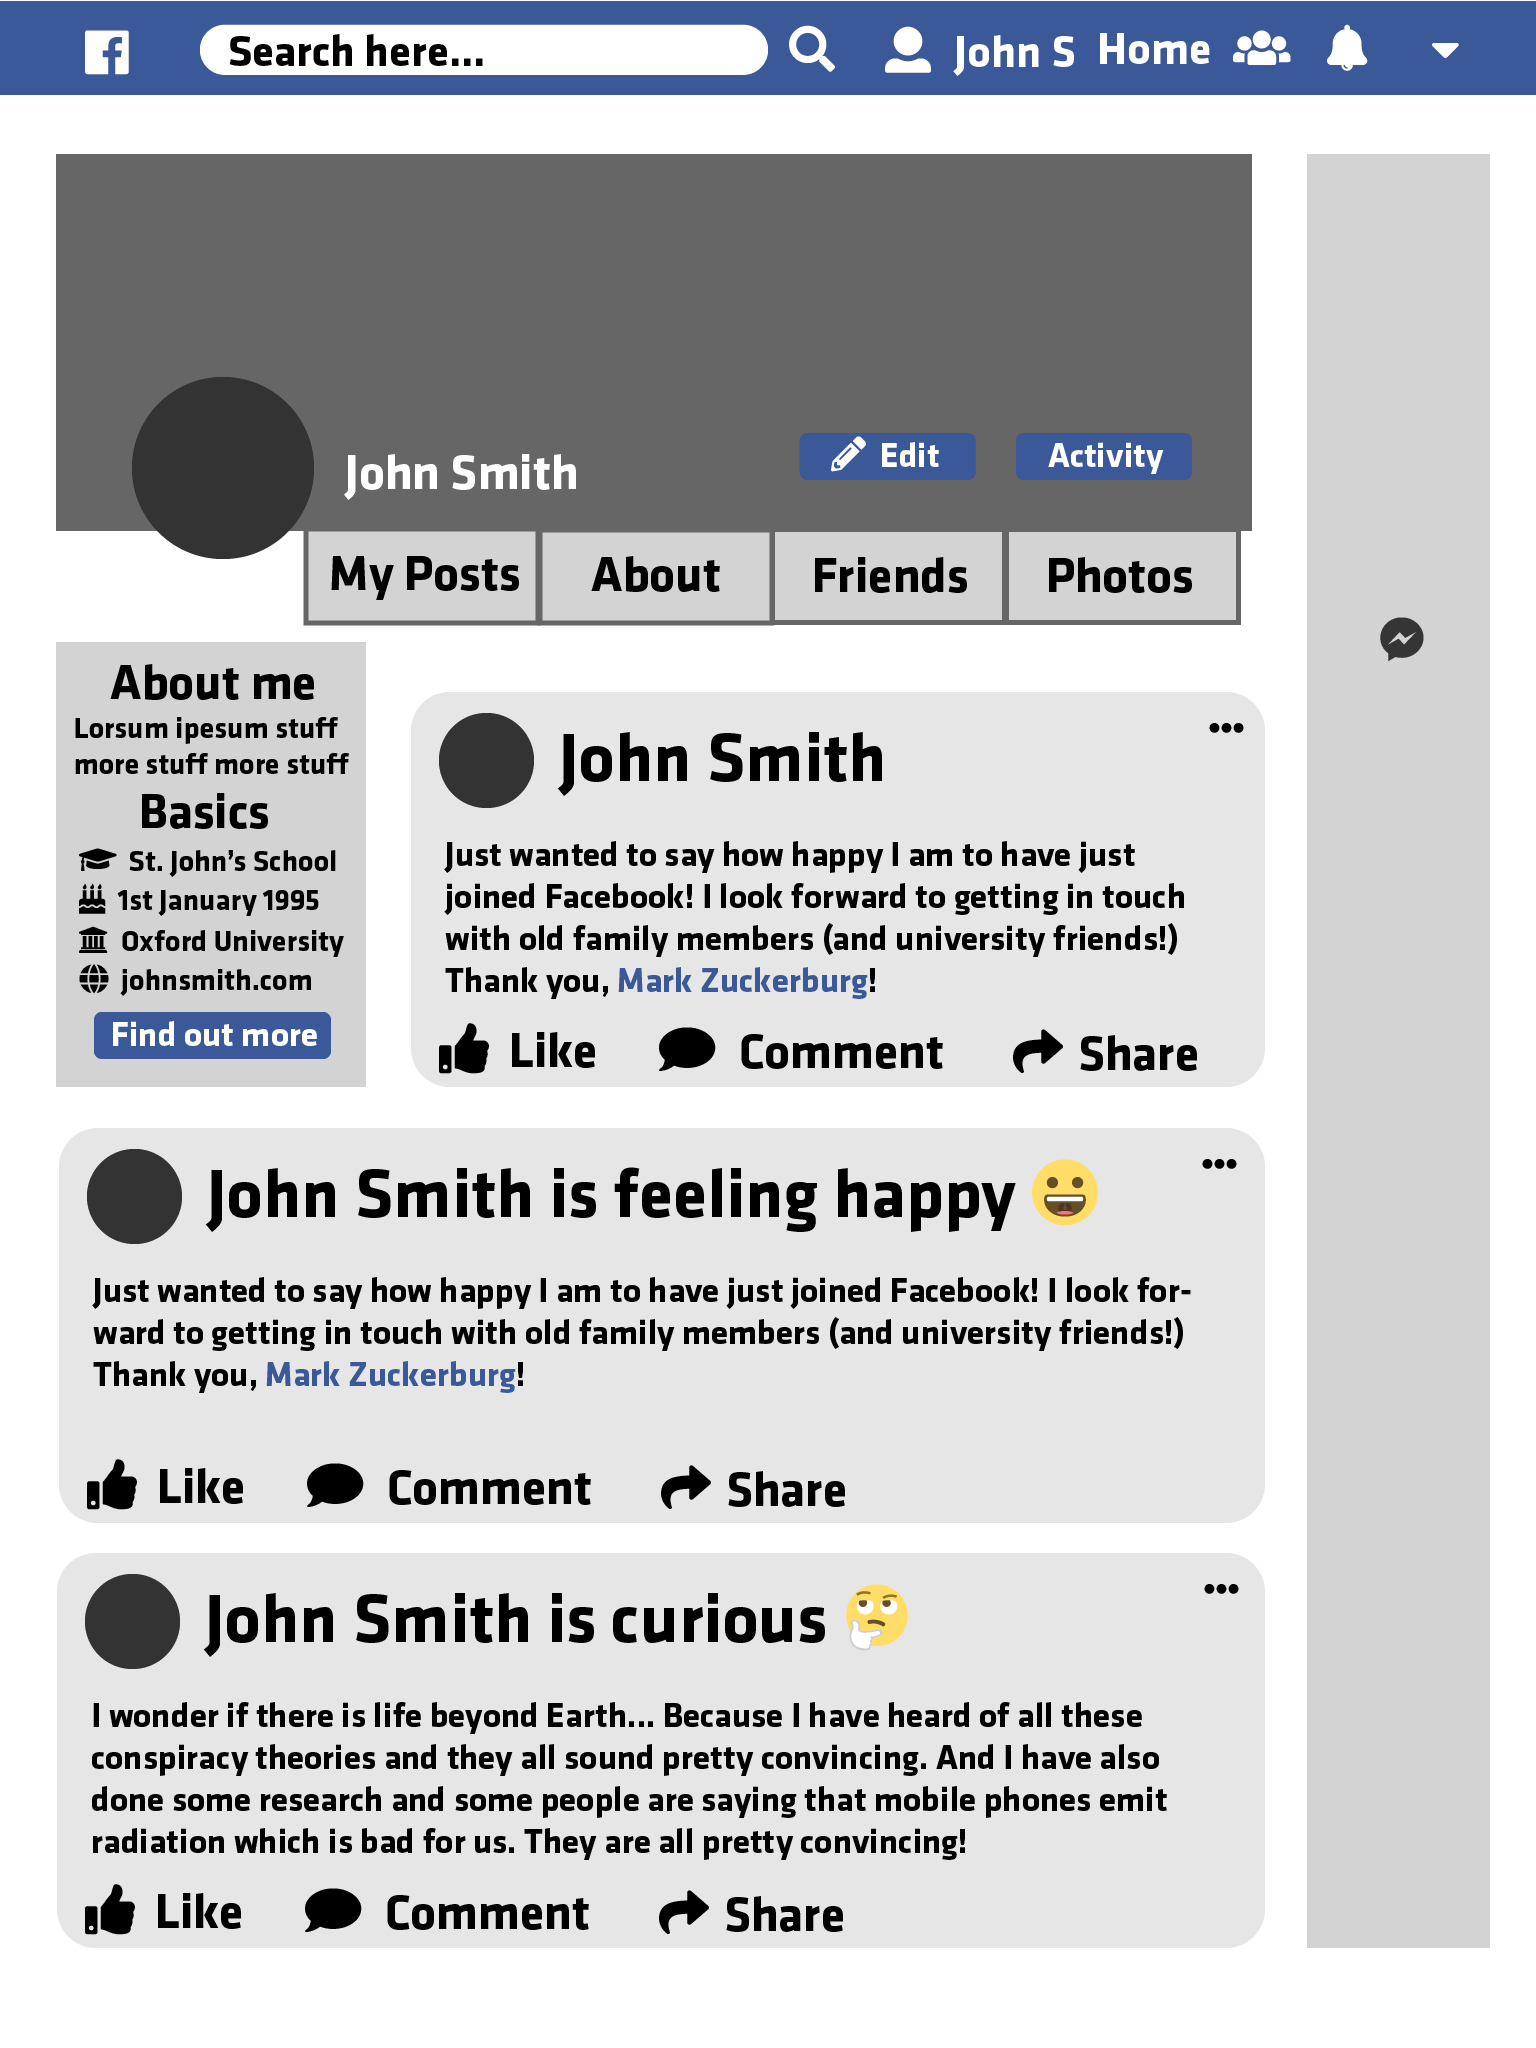 The Facebook profile page